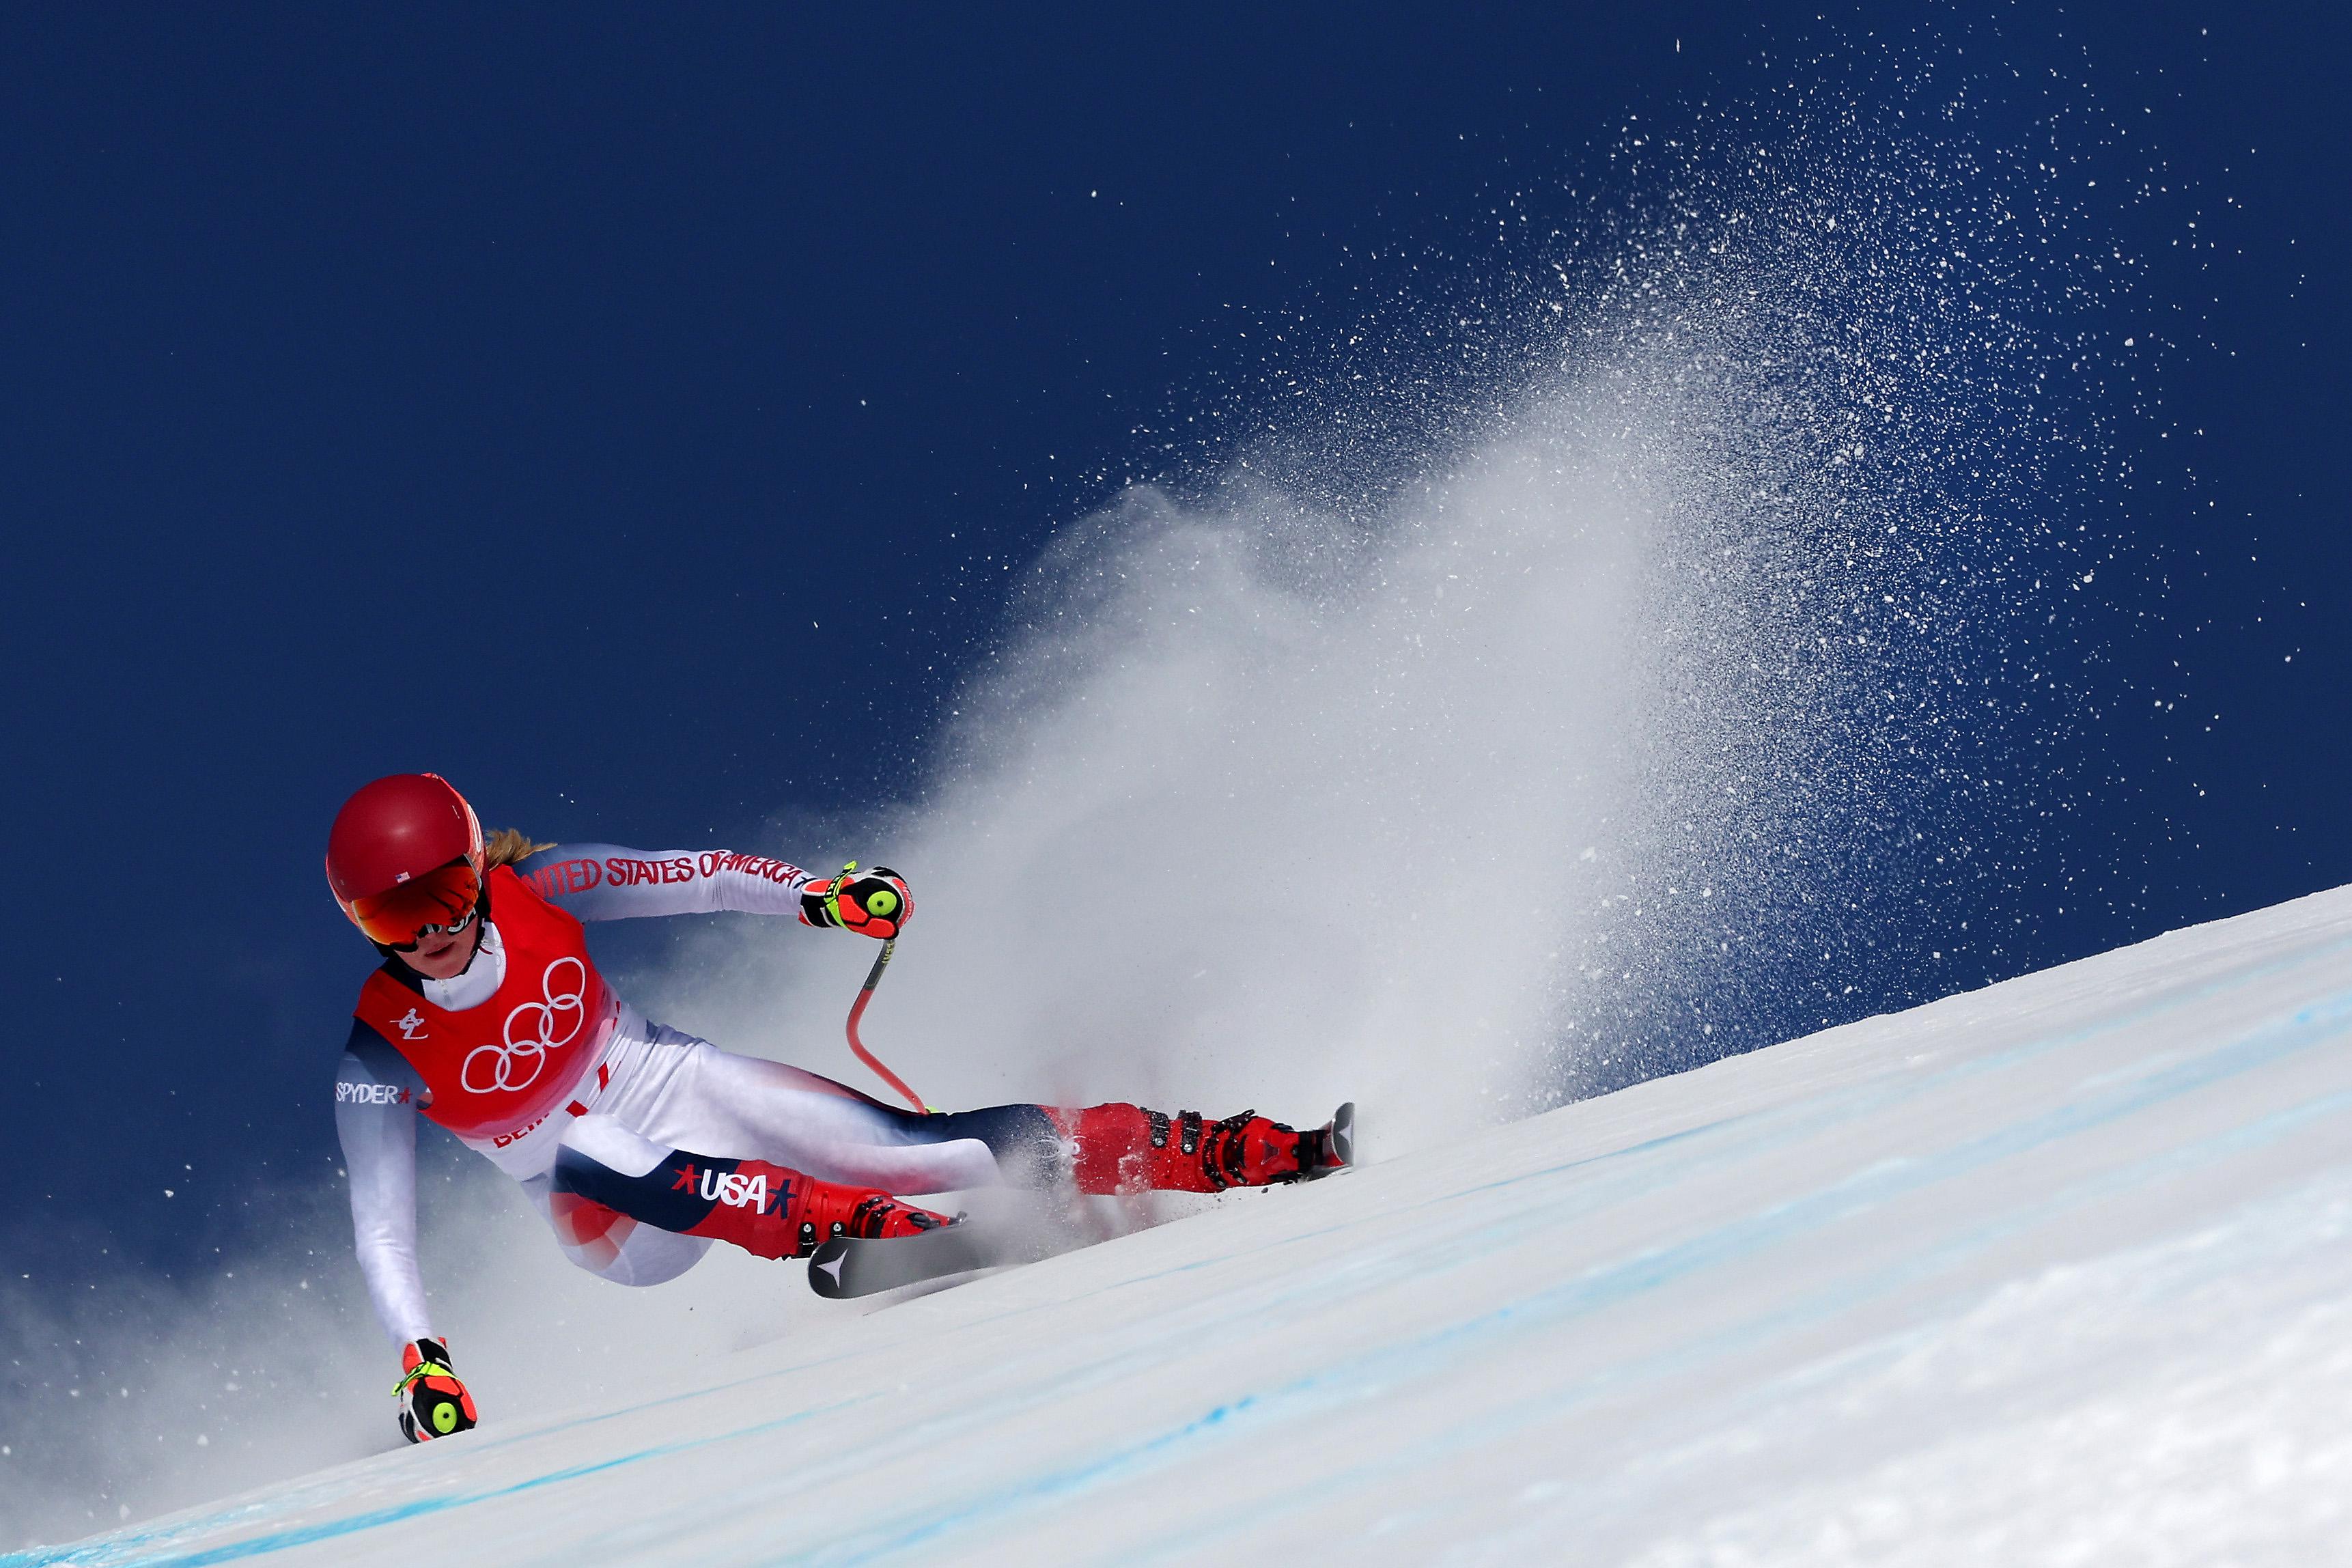 Mikaela Shiffrin skis during the women’s downhill, an alpine event.